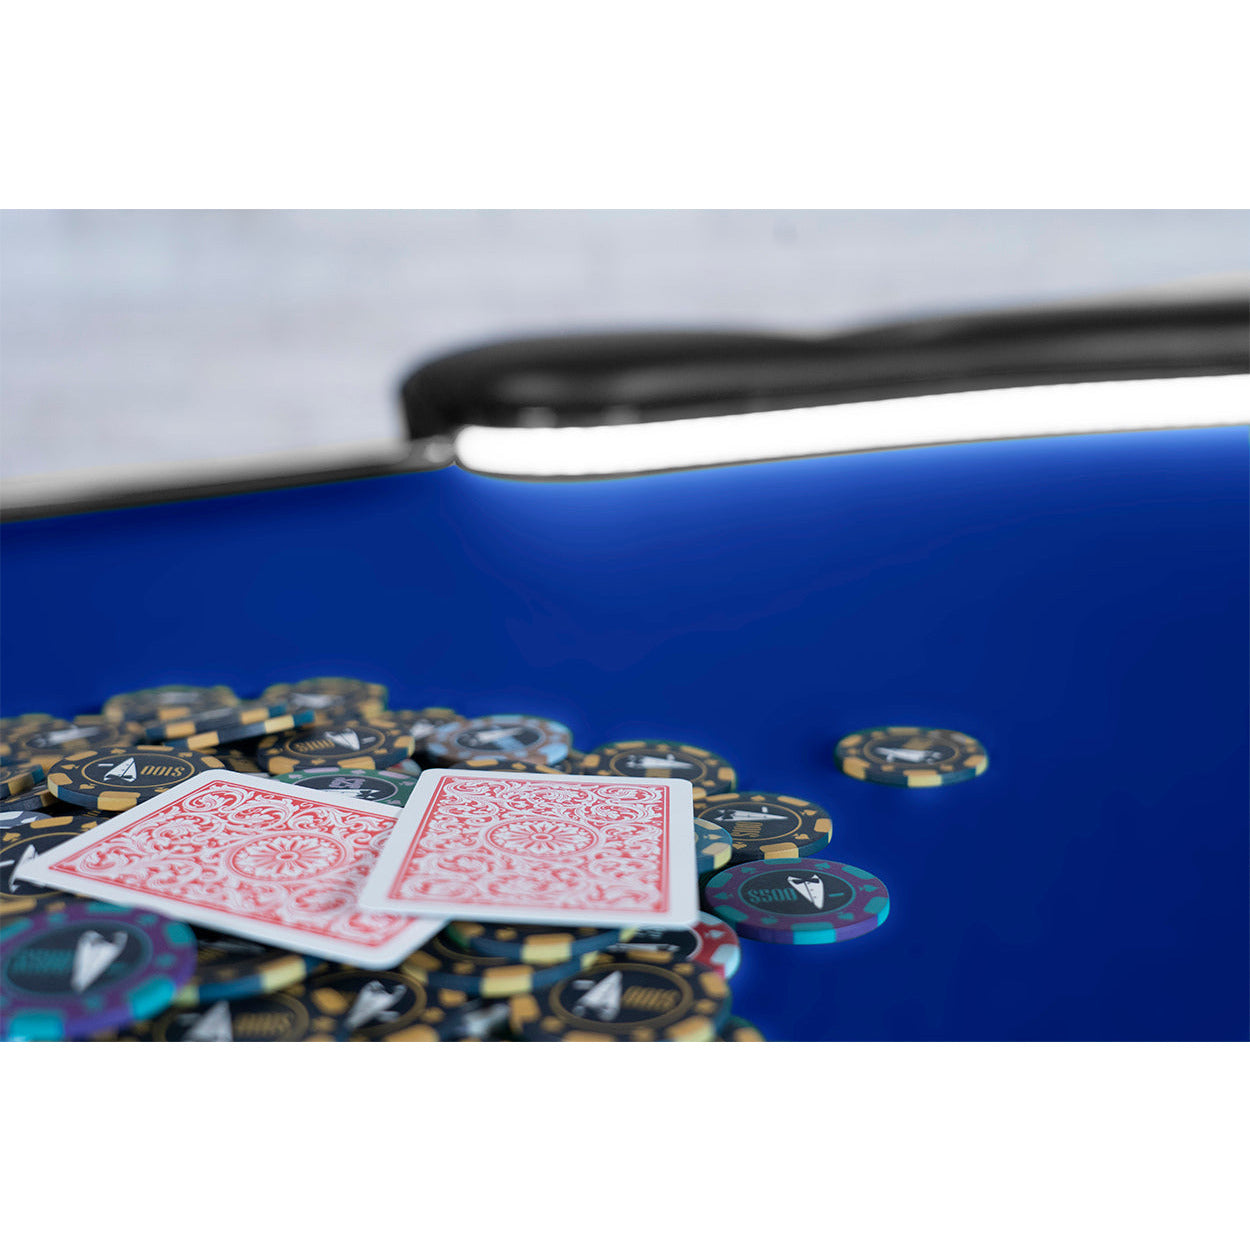 BBO The Aces Pro Alpha Folding Poker Table blue close up of cards and chips